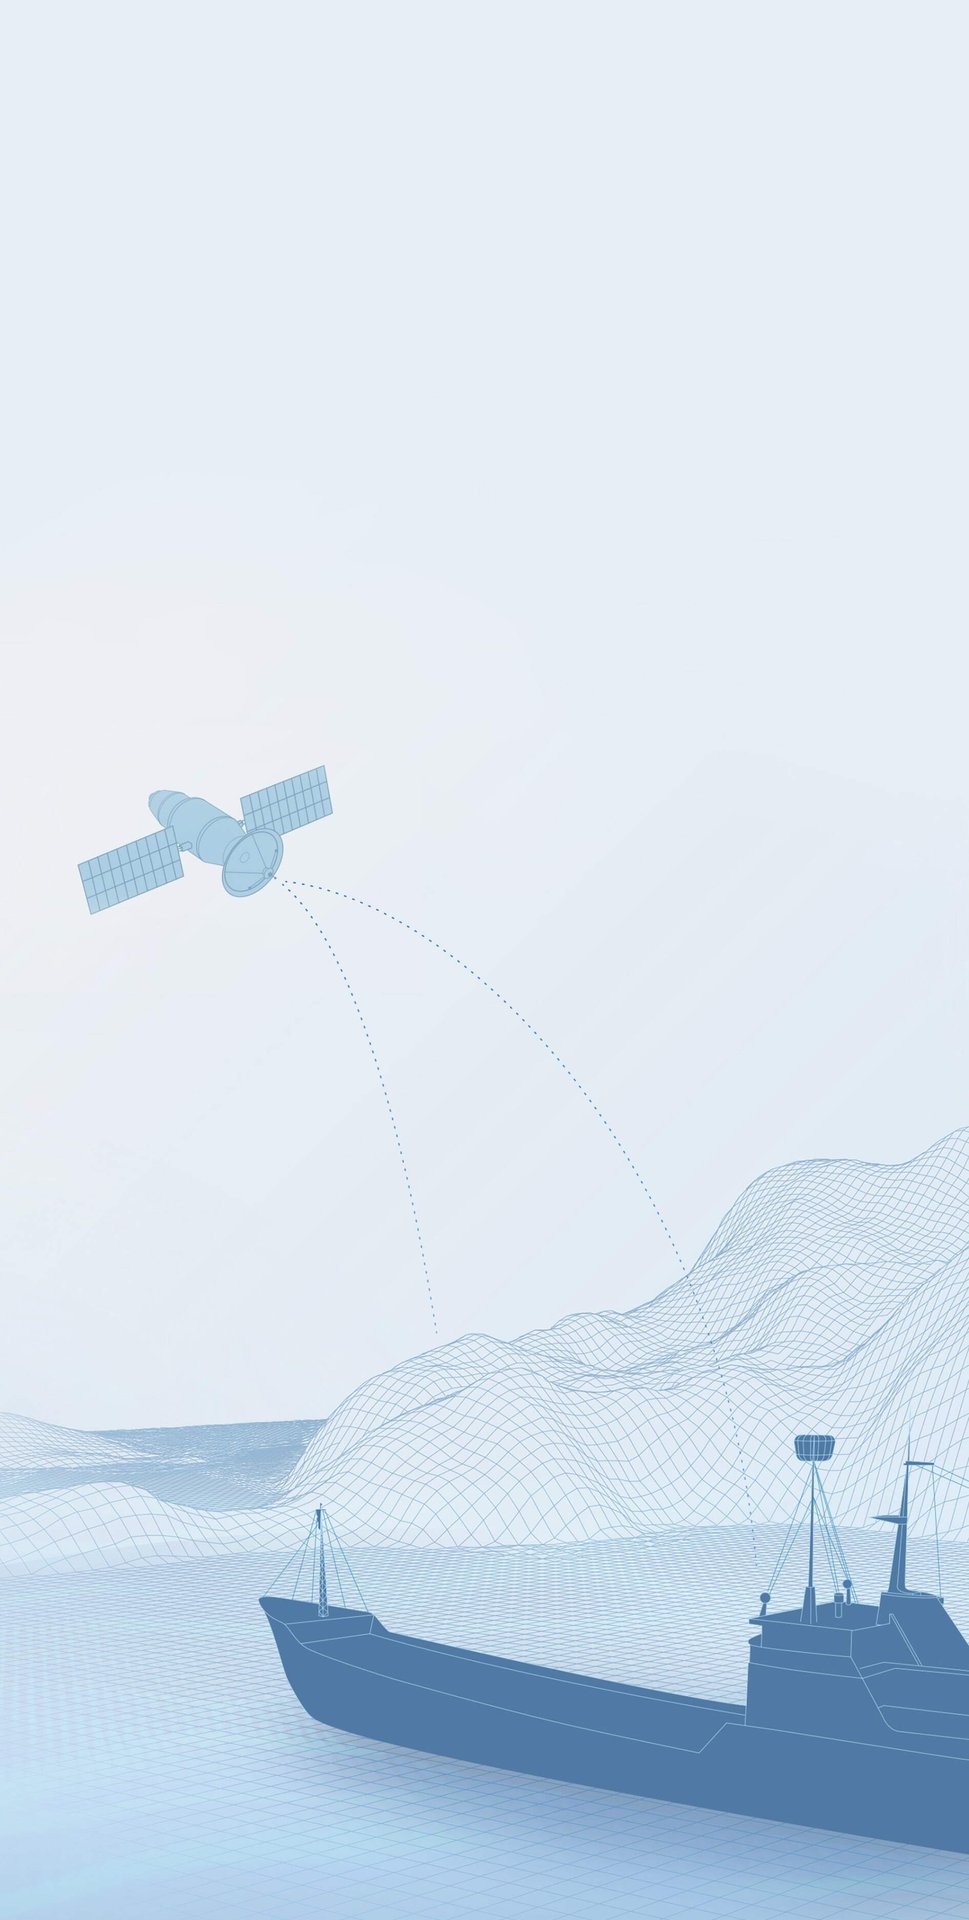 Illustration of a ship on a stylized blue ocean with digital grid lines rising to form mountain shapes in the background. Above in the sky, there is a small plane depicted to the upper left side. The image fades to white towards the top and has a transparent background.